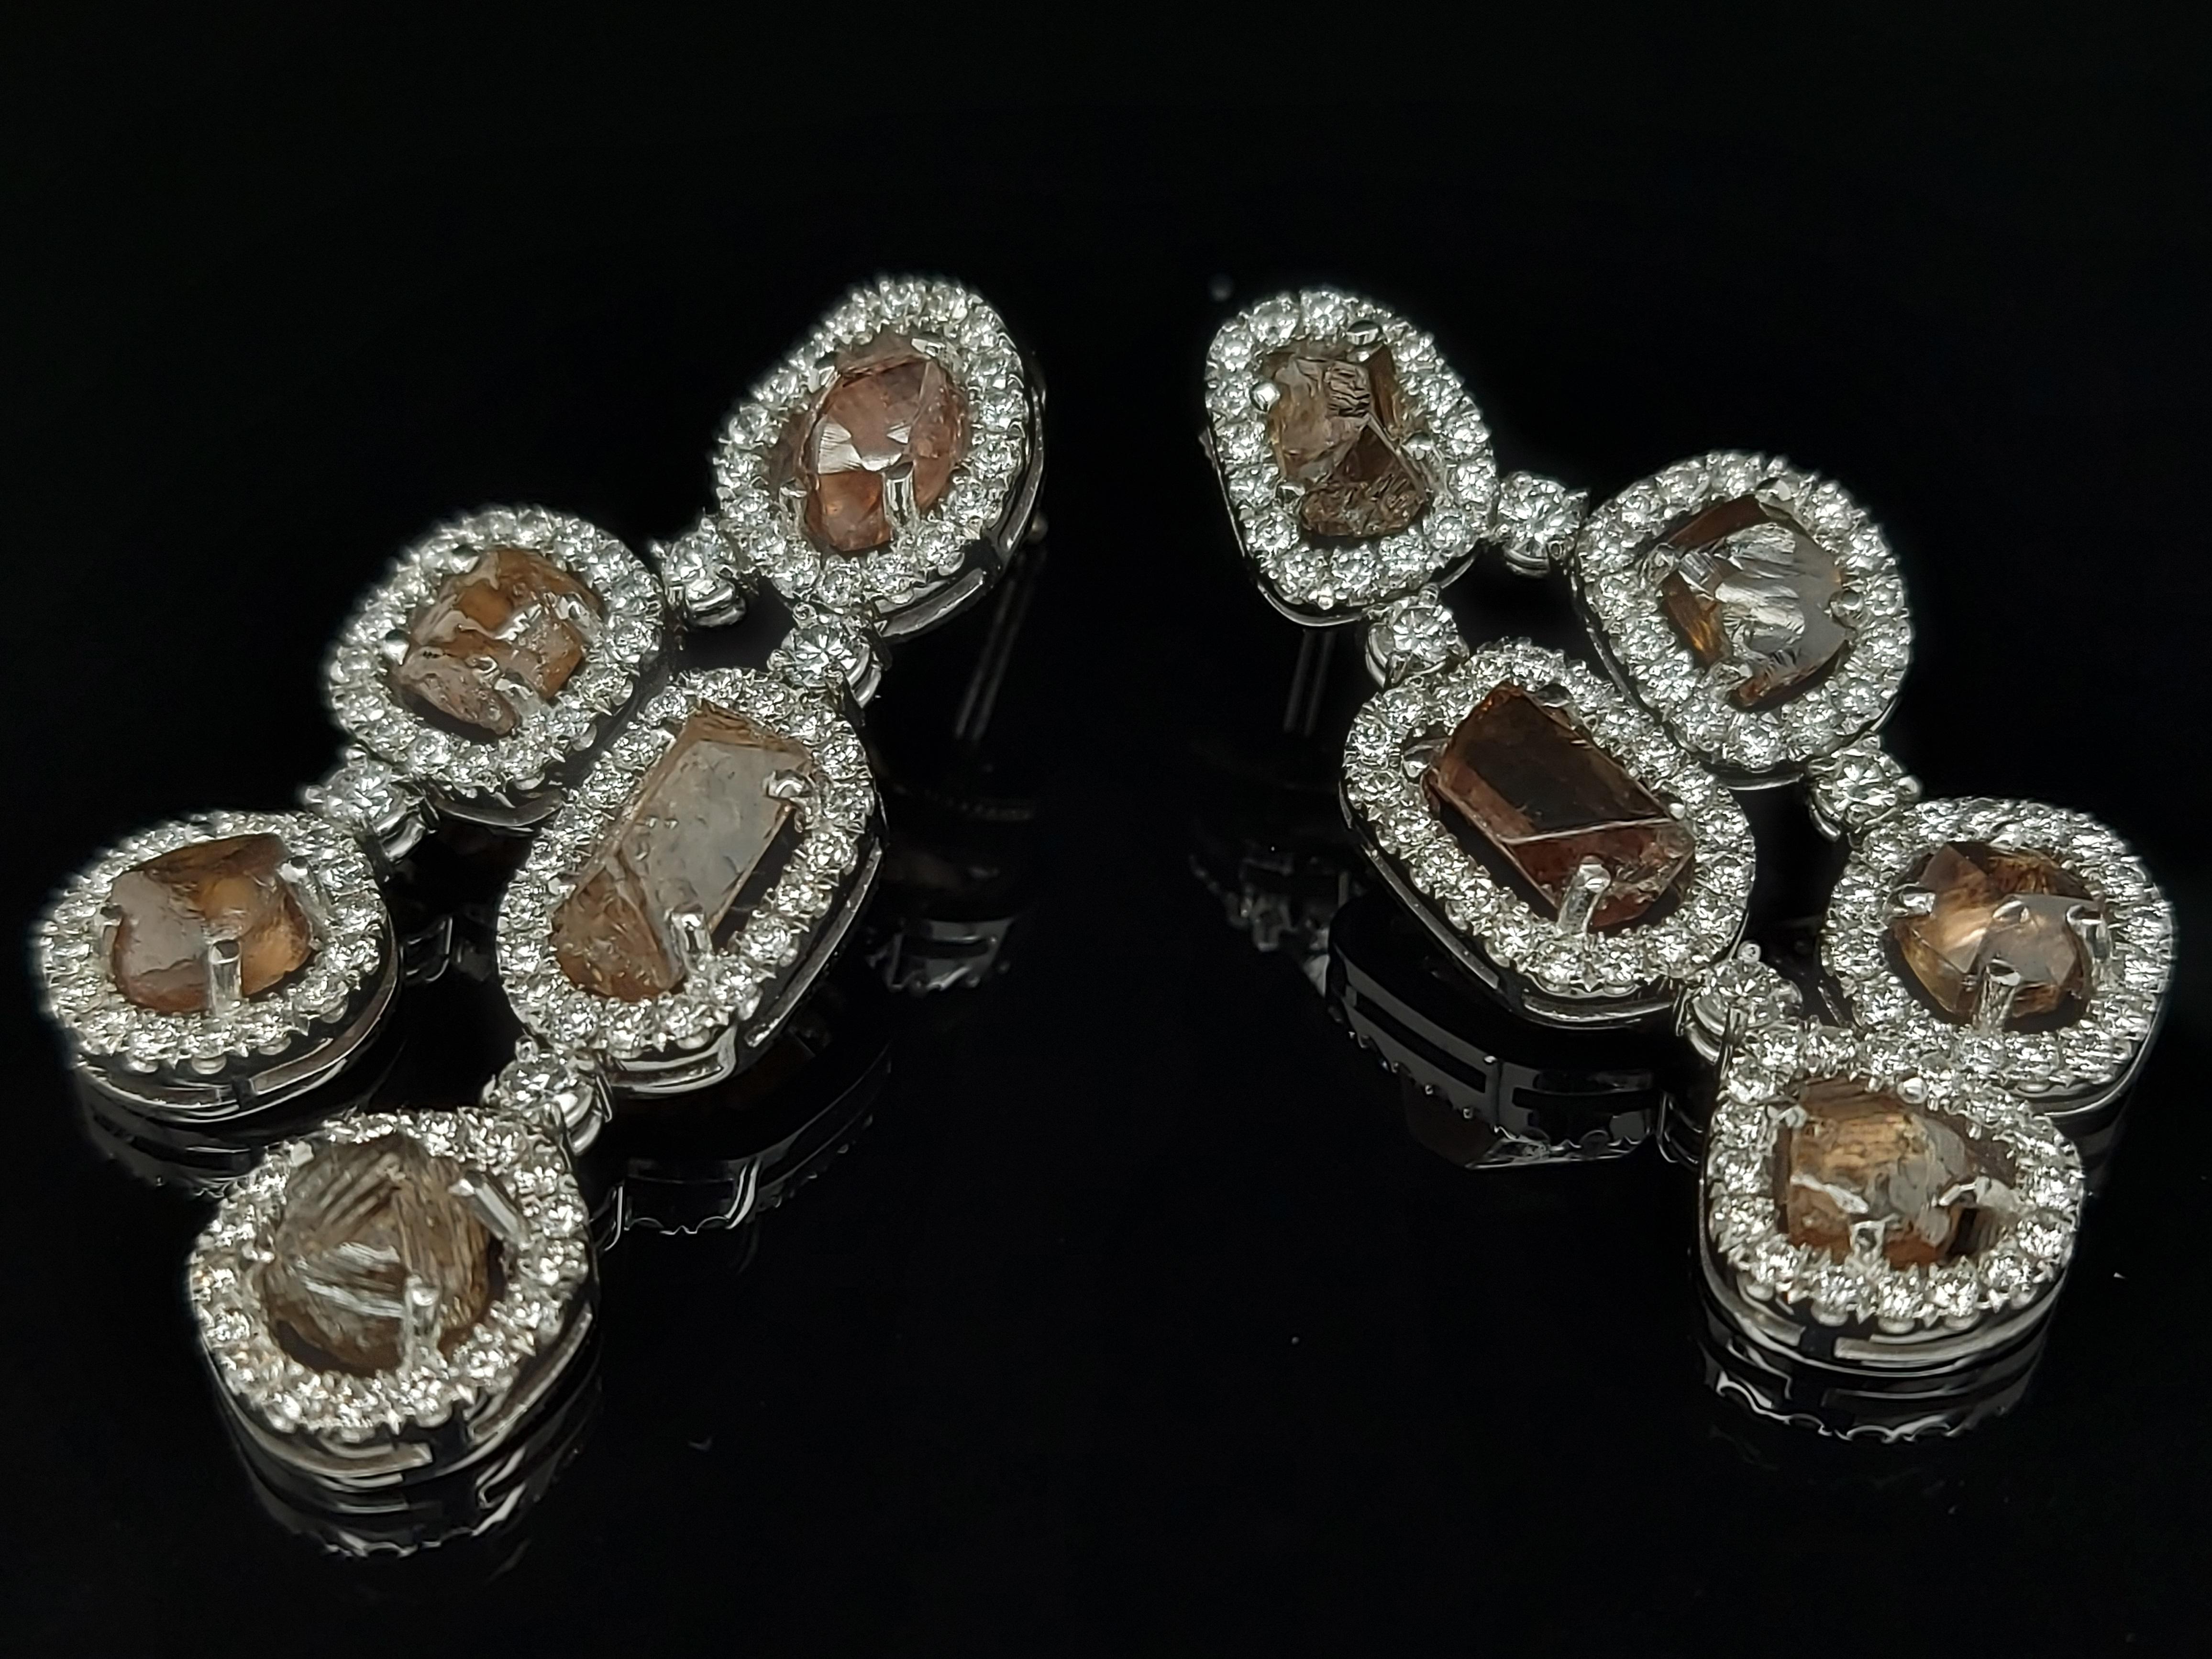 Magnificent 18kt Gold Chandelier Earrings with 13.22 Ct Natural Rough Diamonds For Sale 4